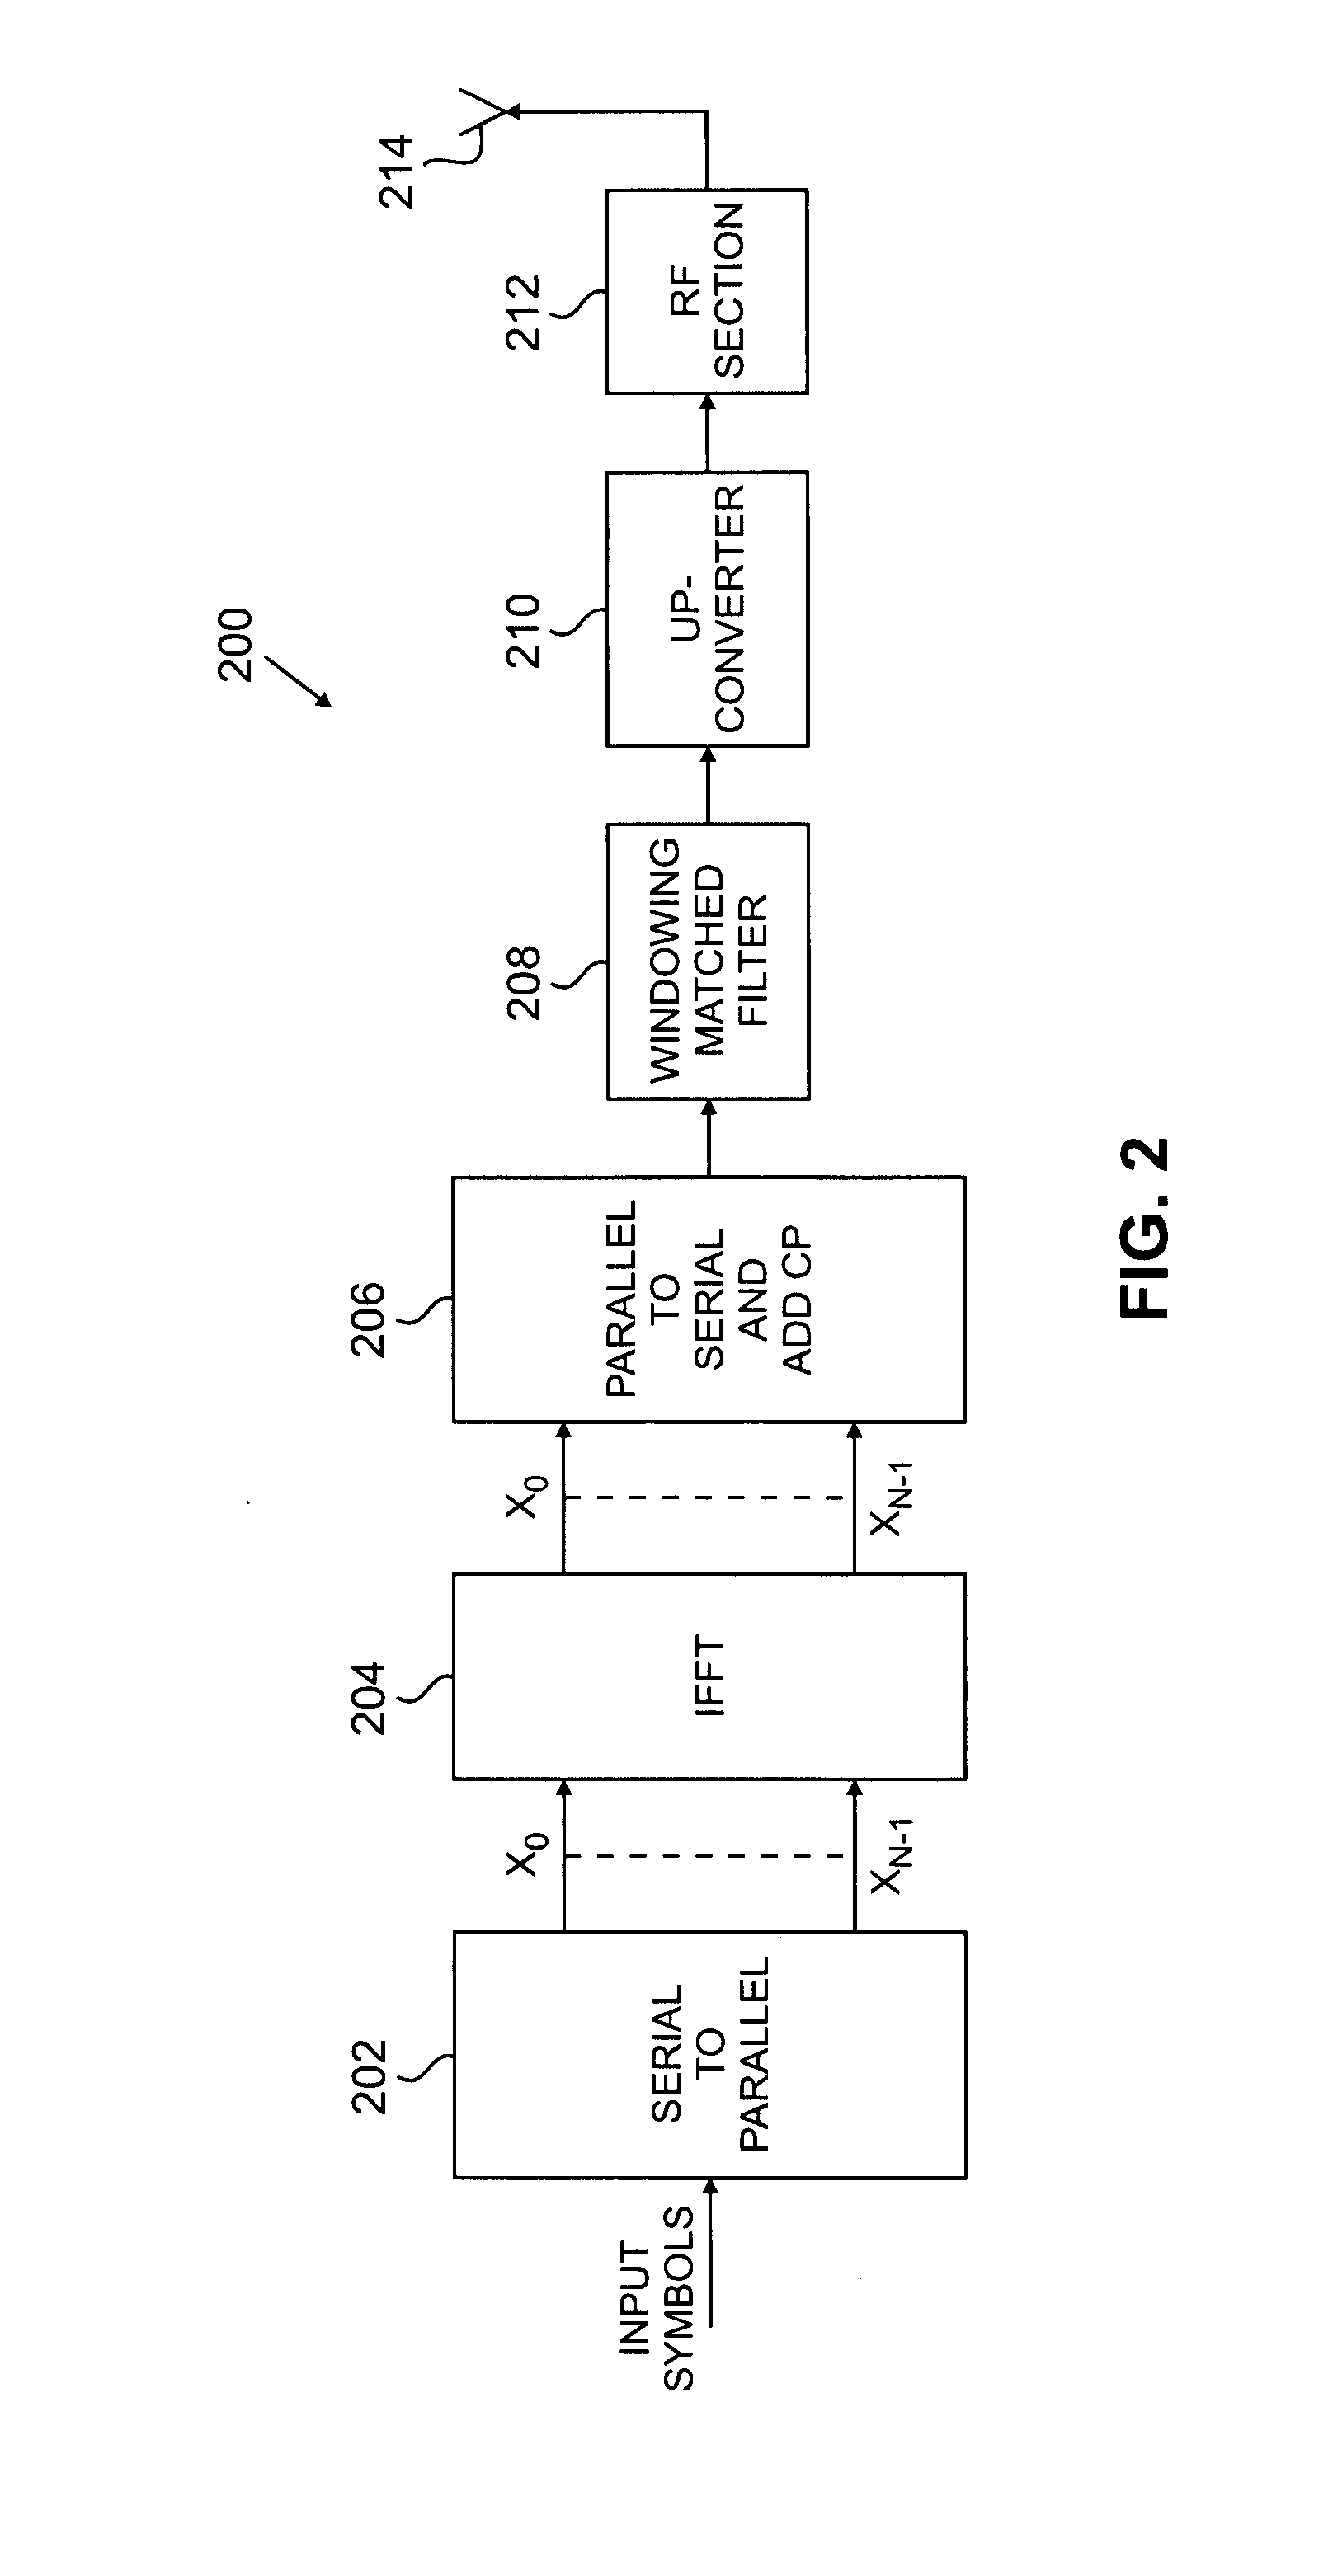 Synchronous spectrum sharing by dedicated networks using OFDM/OFDMA signaling